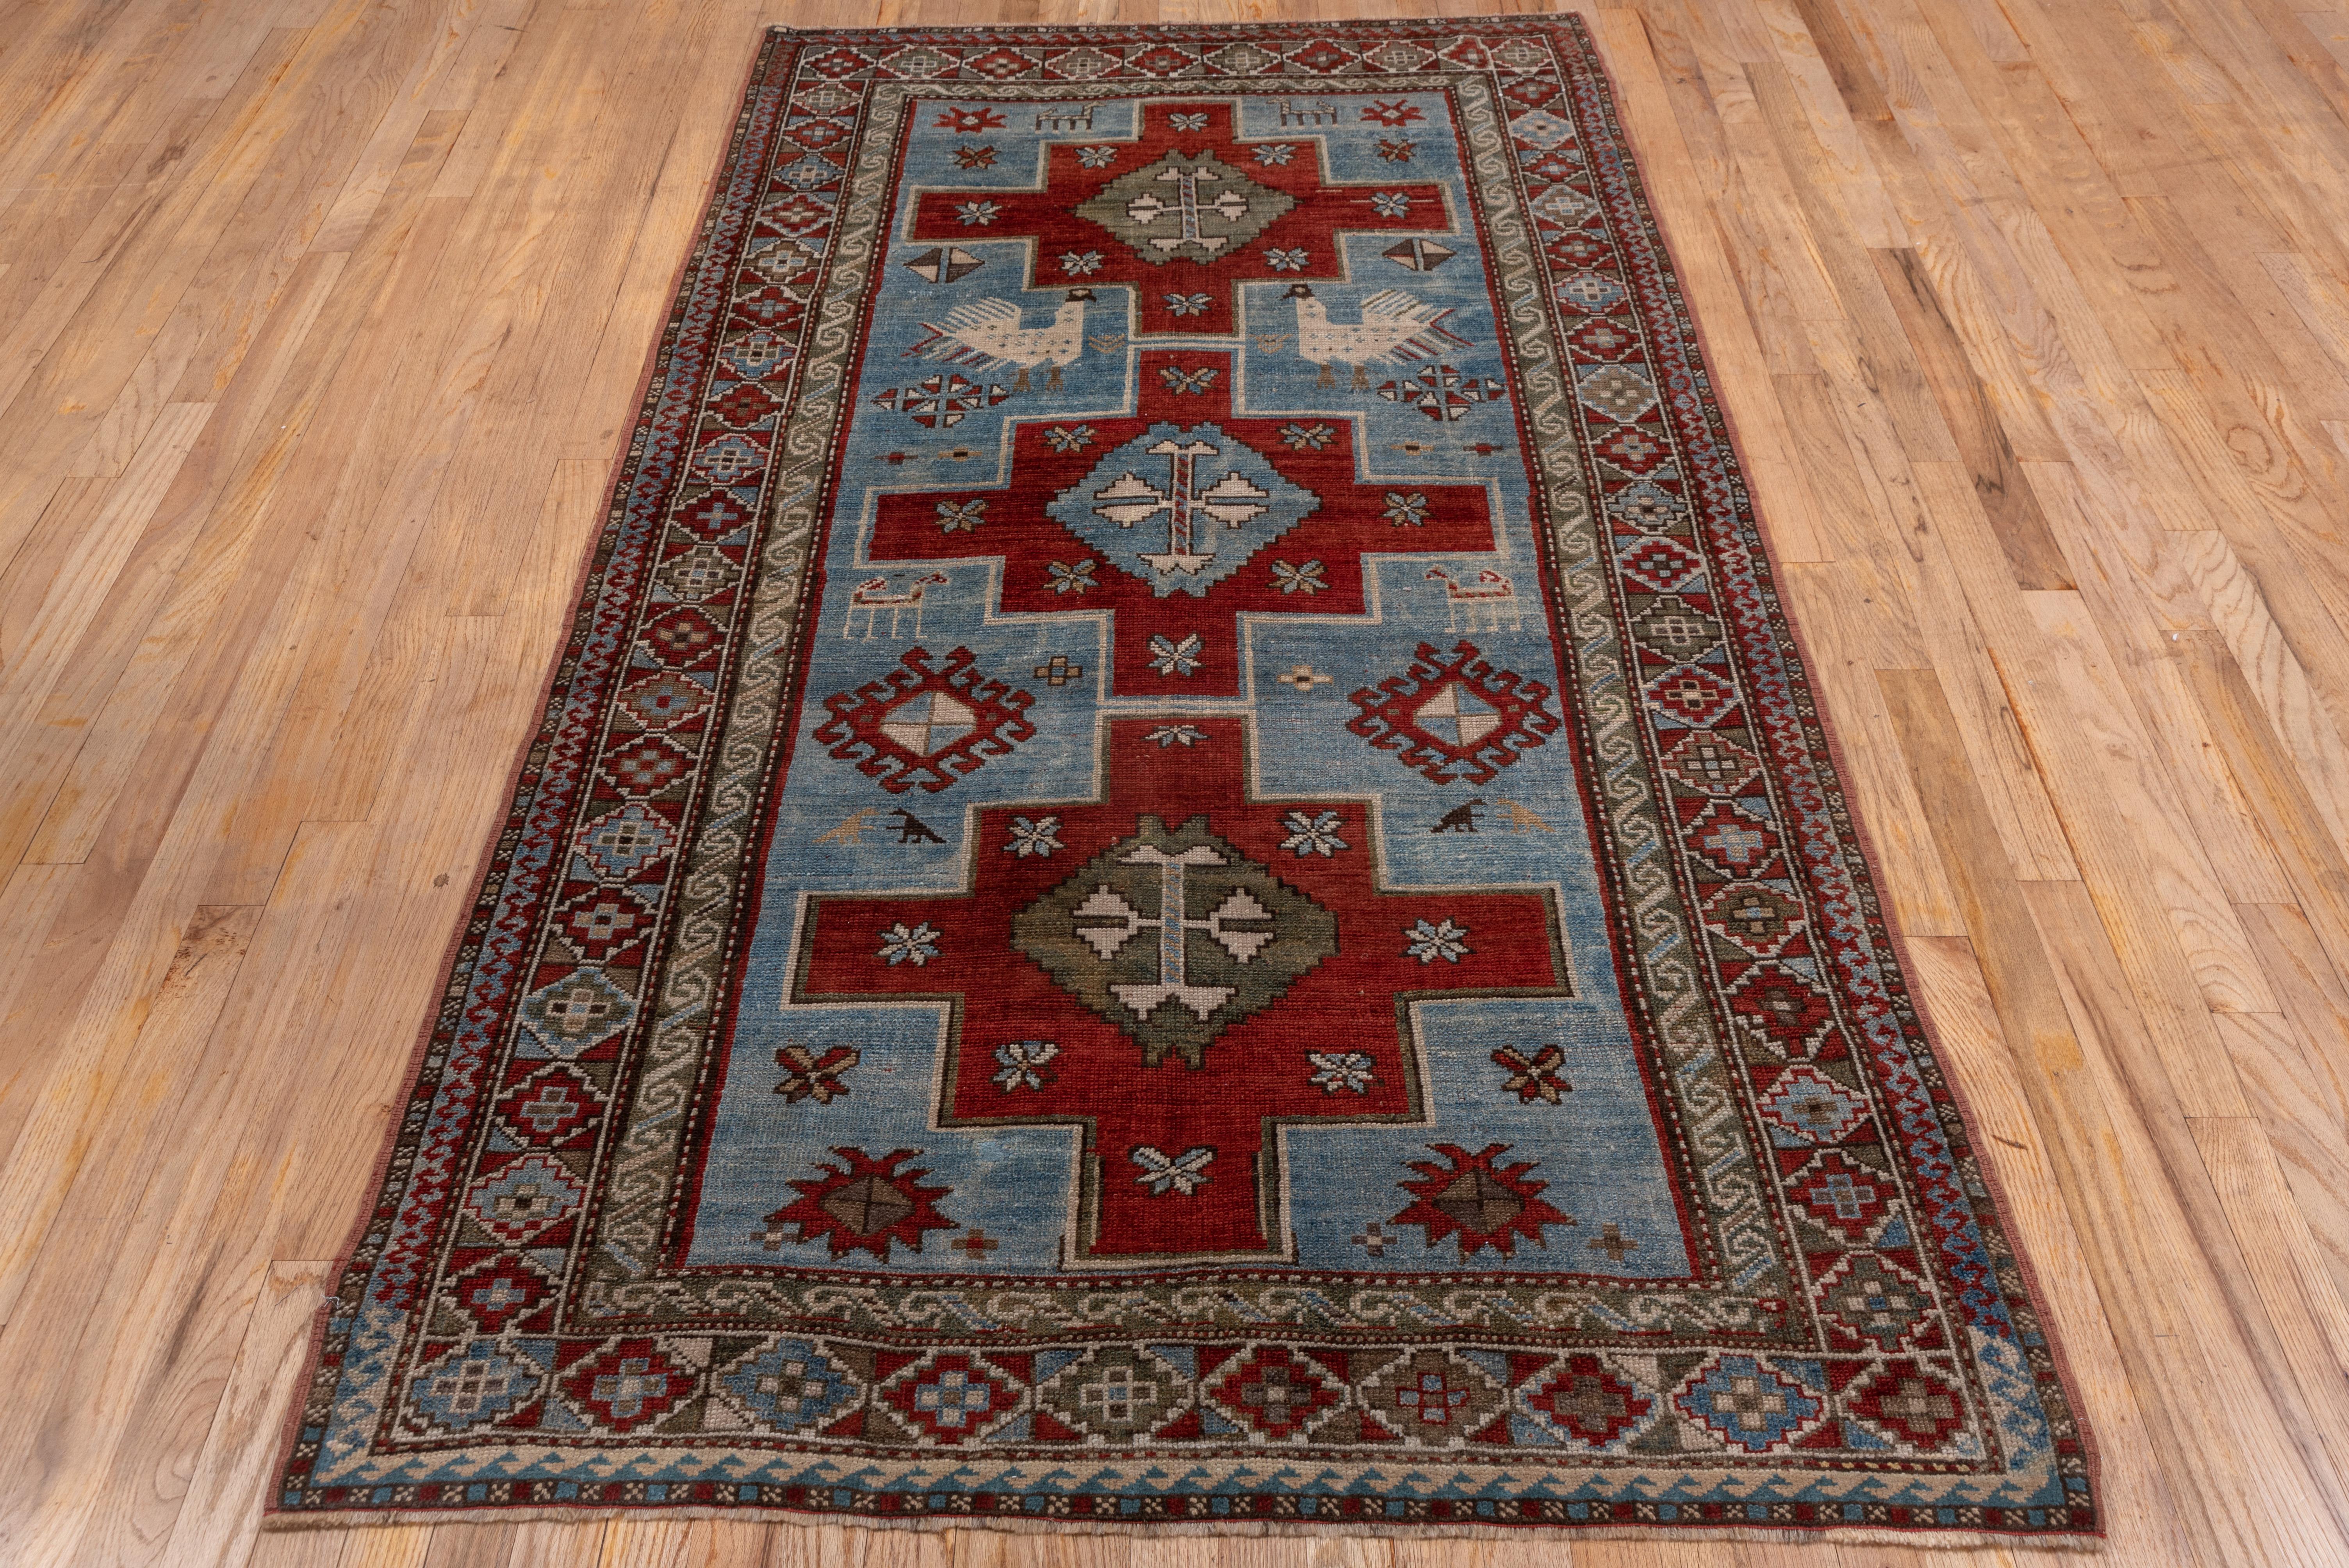 Early 20th Century Antique Tribal Caucasian Rug, Blue and Red Field, Green Accents, Kazak Style